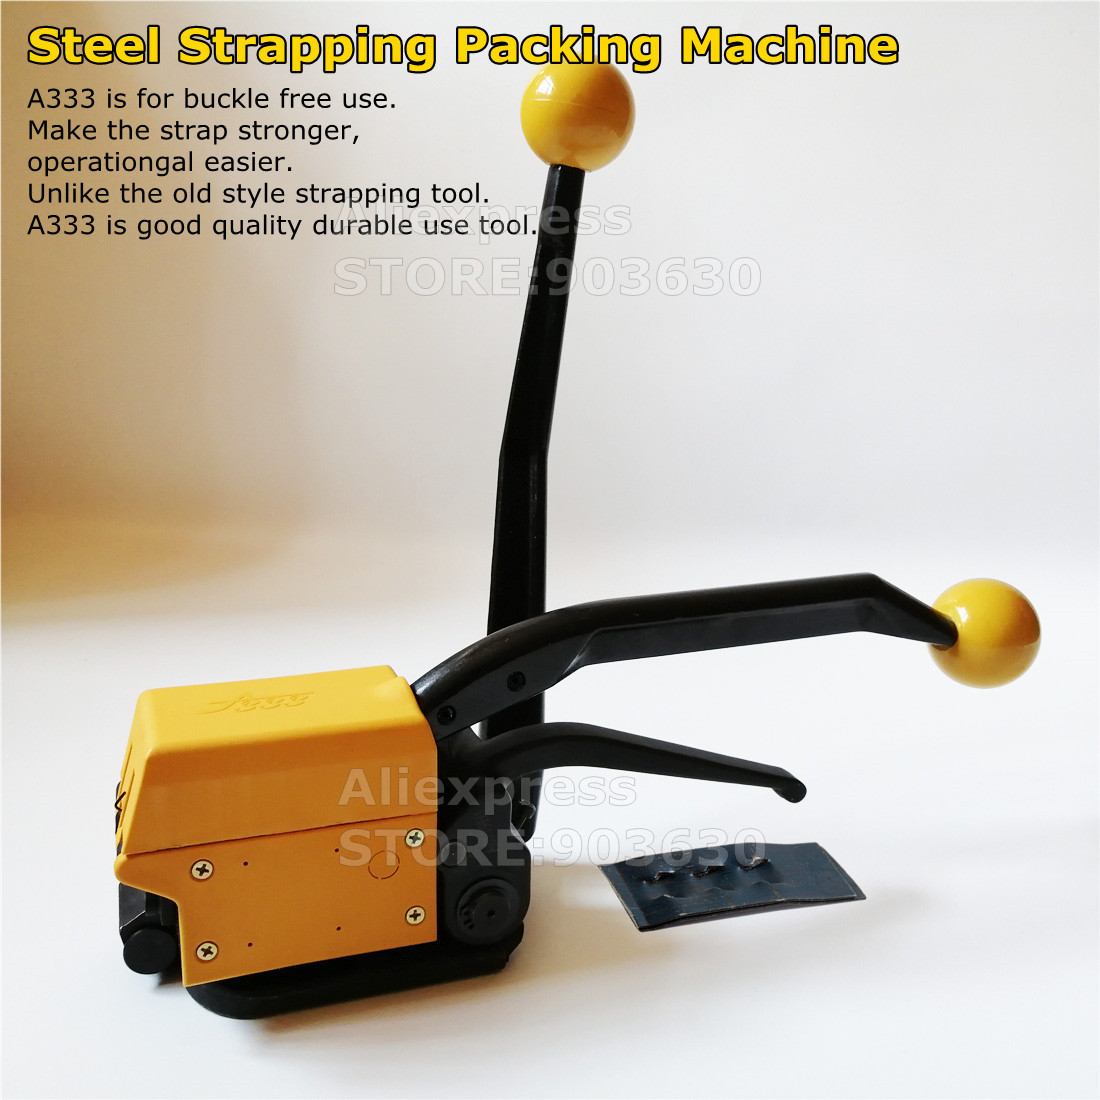 Portable Manual combination sealless steel strapping machine buckle free metal strapping tool packing wrapping machine